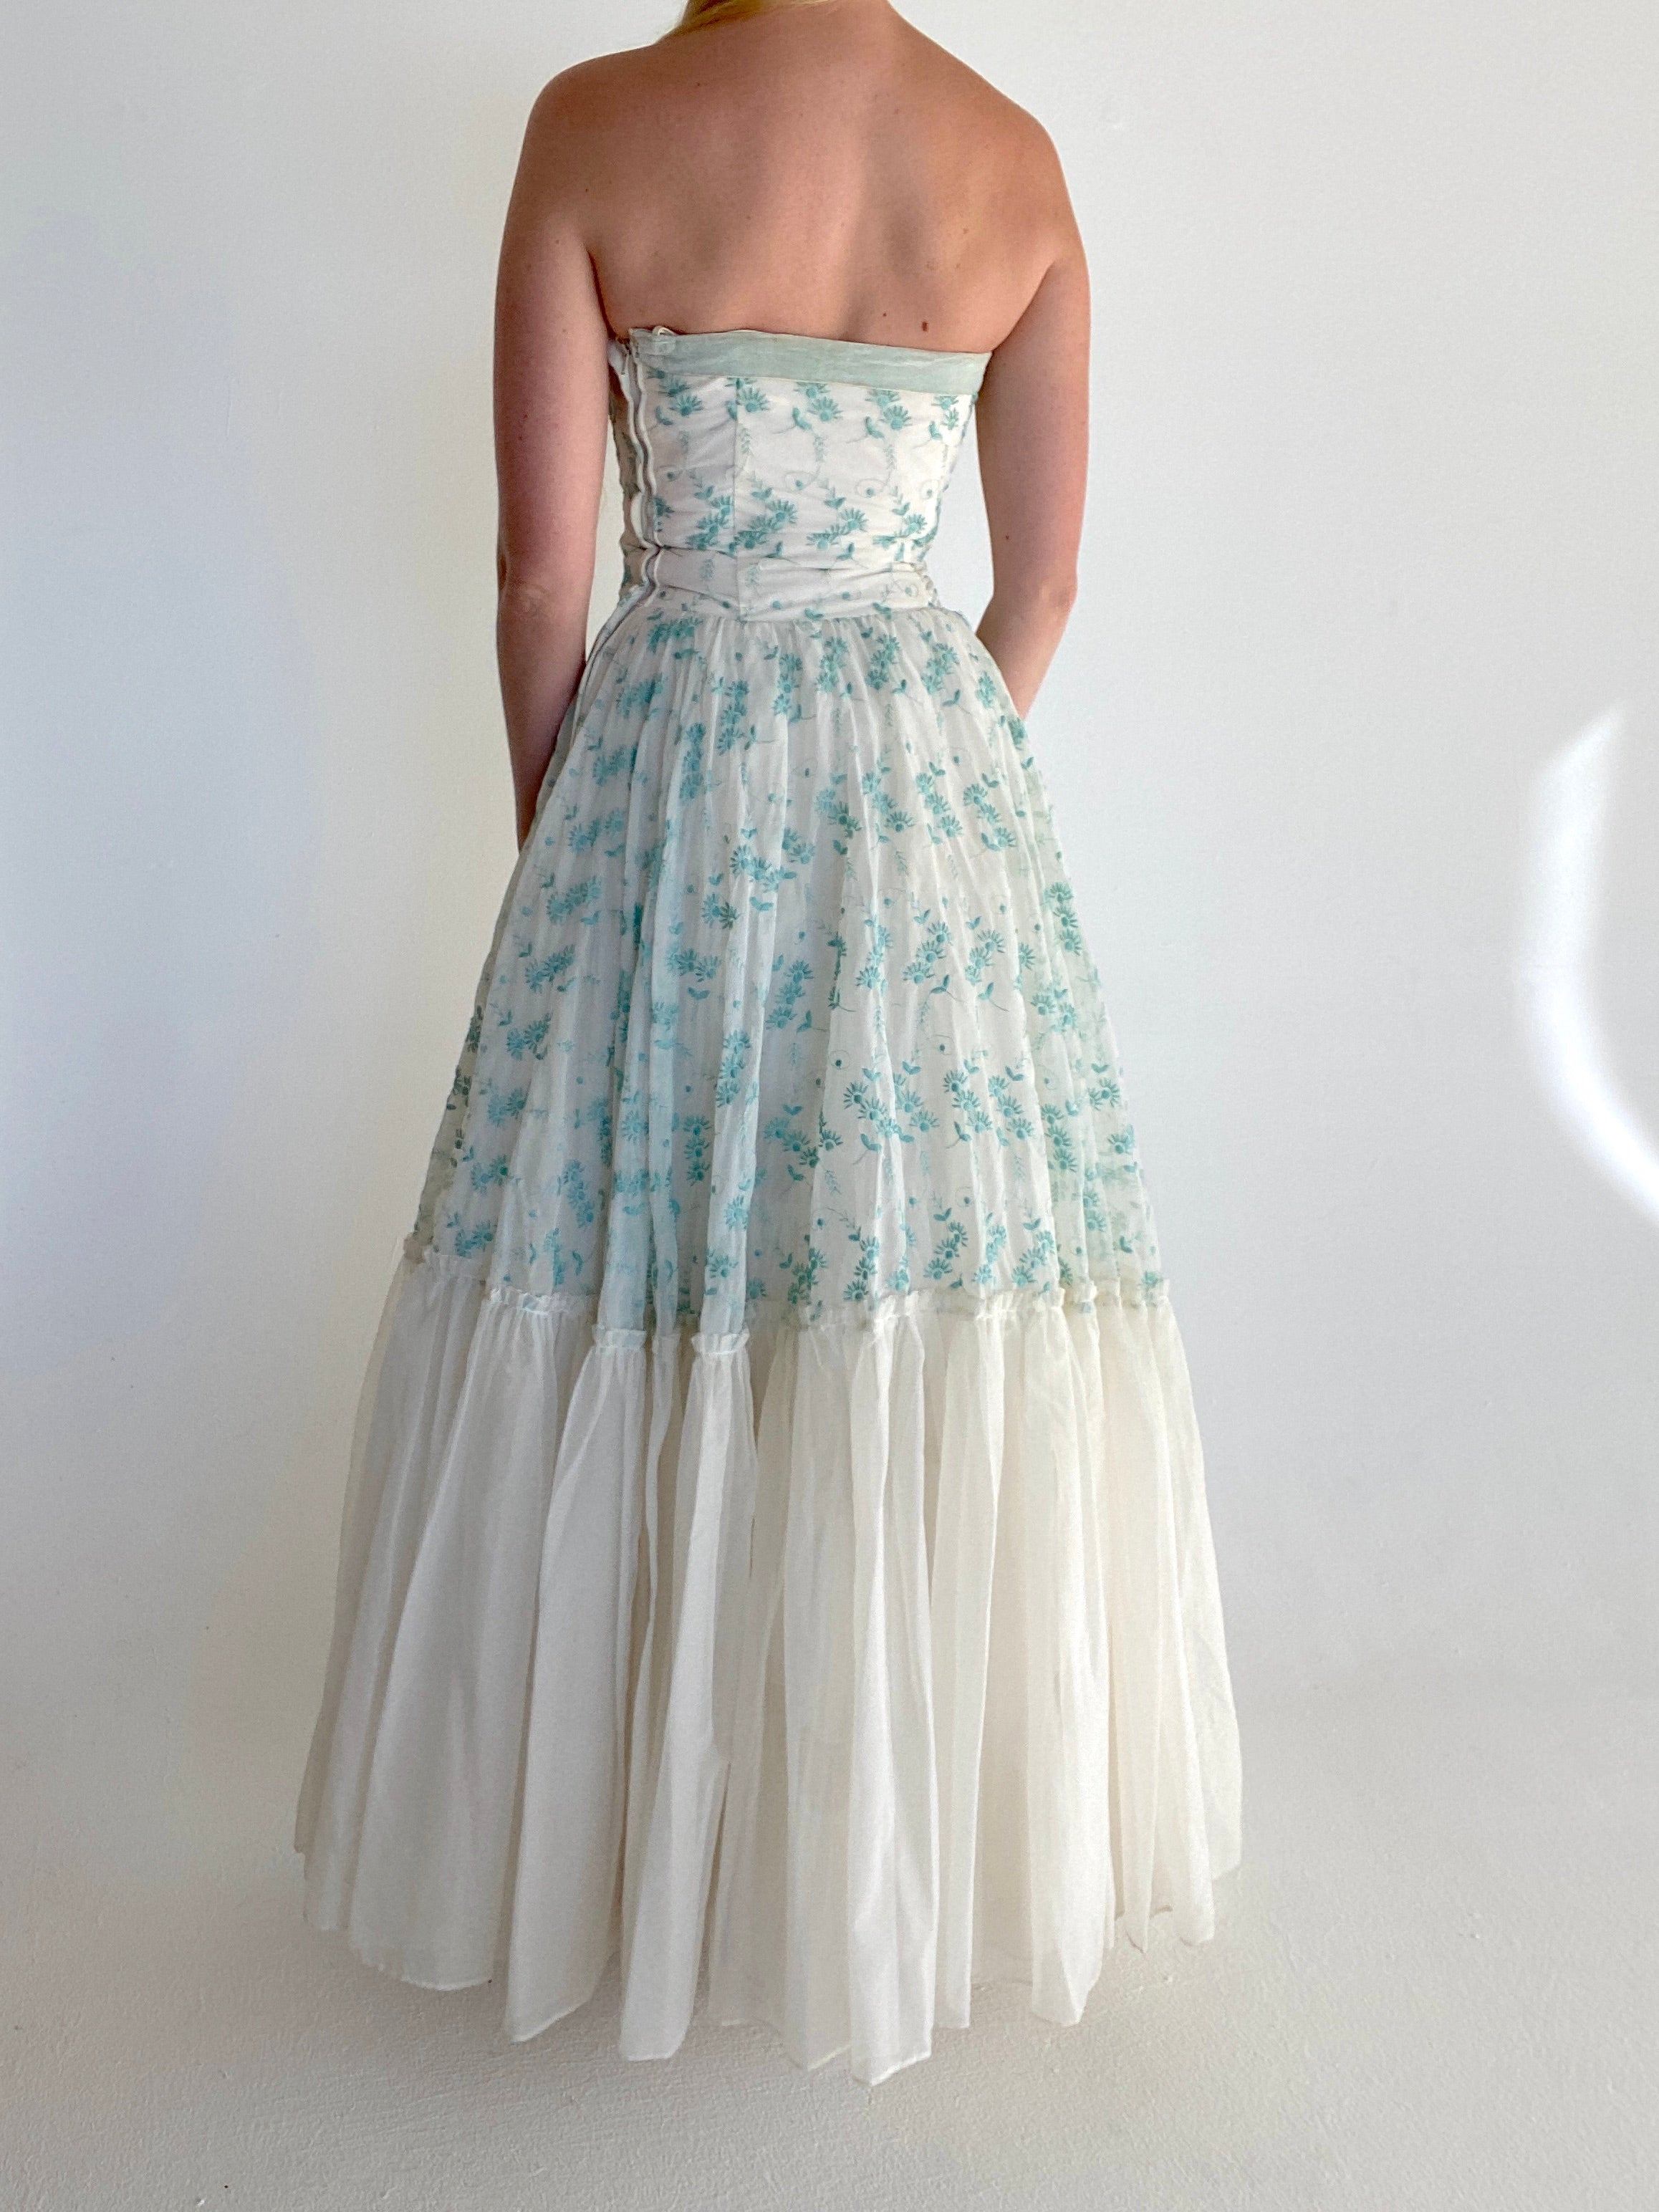 Strapless 1940's Embroidered Turquoise Floral Party Dress